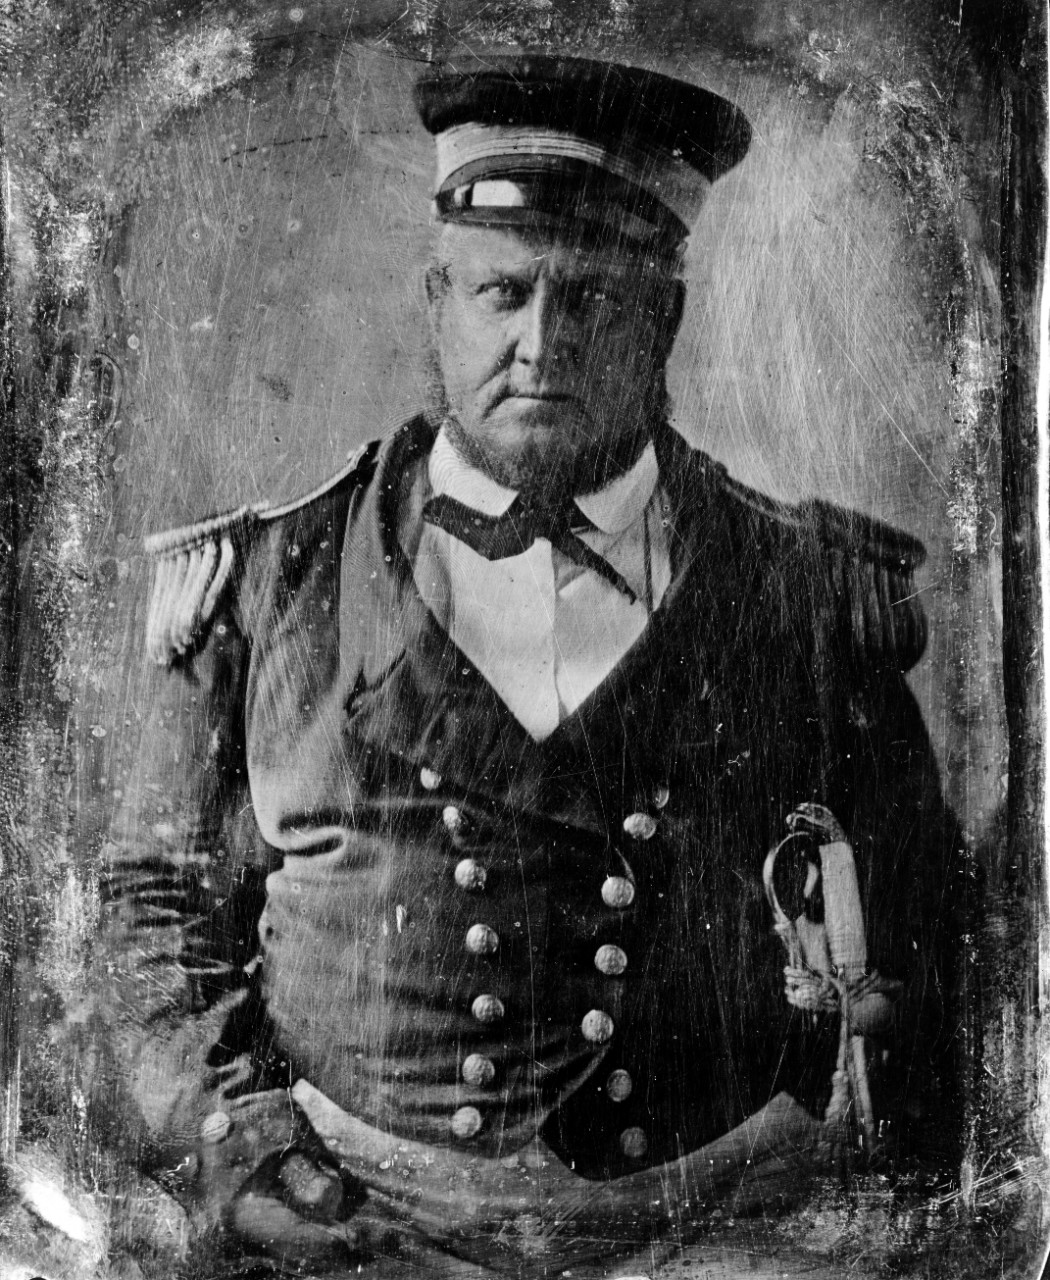 <p>NH 48756 CDR Albert Gallatin Slaughter, USN</p><div style="left: -10000px; top: 0px; width: 9000px; height: 16px; overflow: hidden; position: absolute;"><div>&nbsp;</div></div>